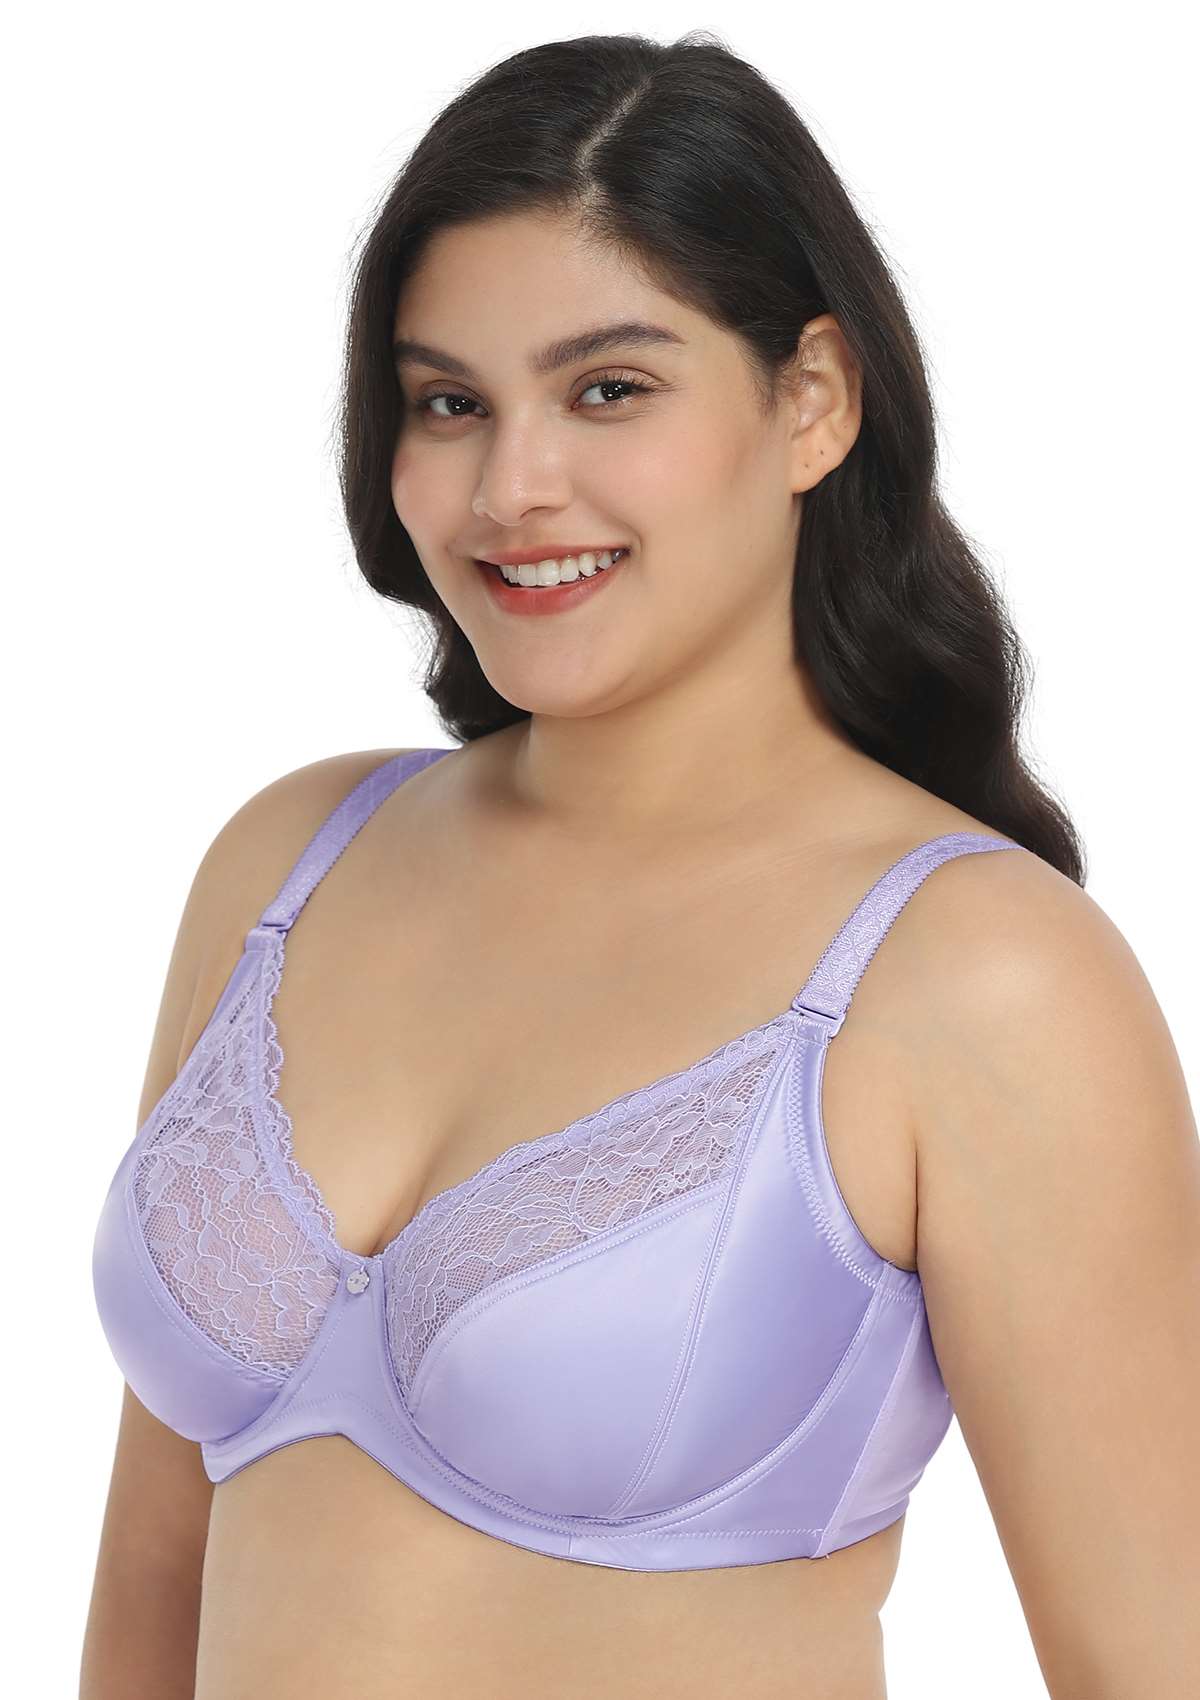 HSIA Foxy Satin Silky Full Coverage Underwire Bra With Floral Lace Trim - Purple / 42 / D